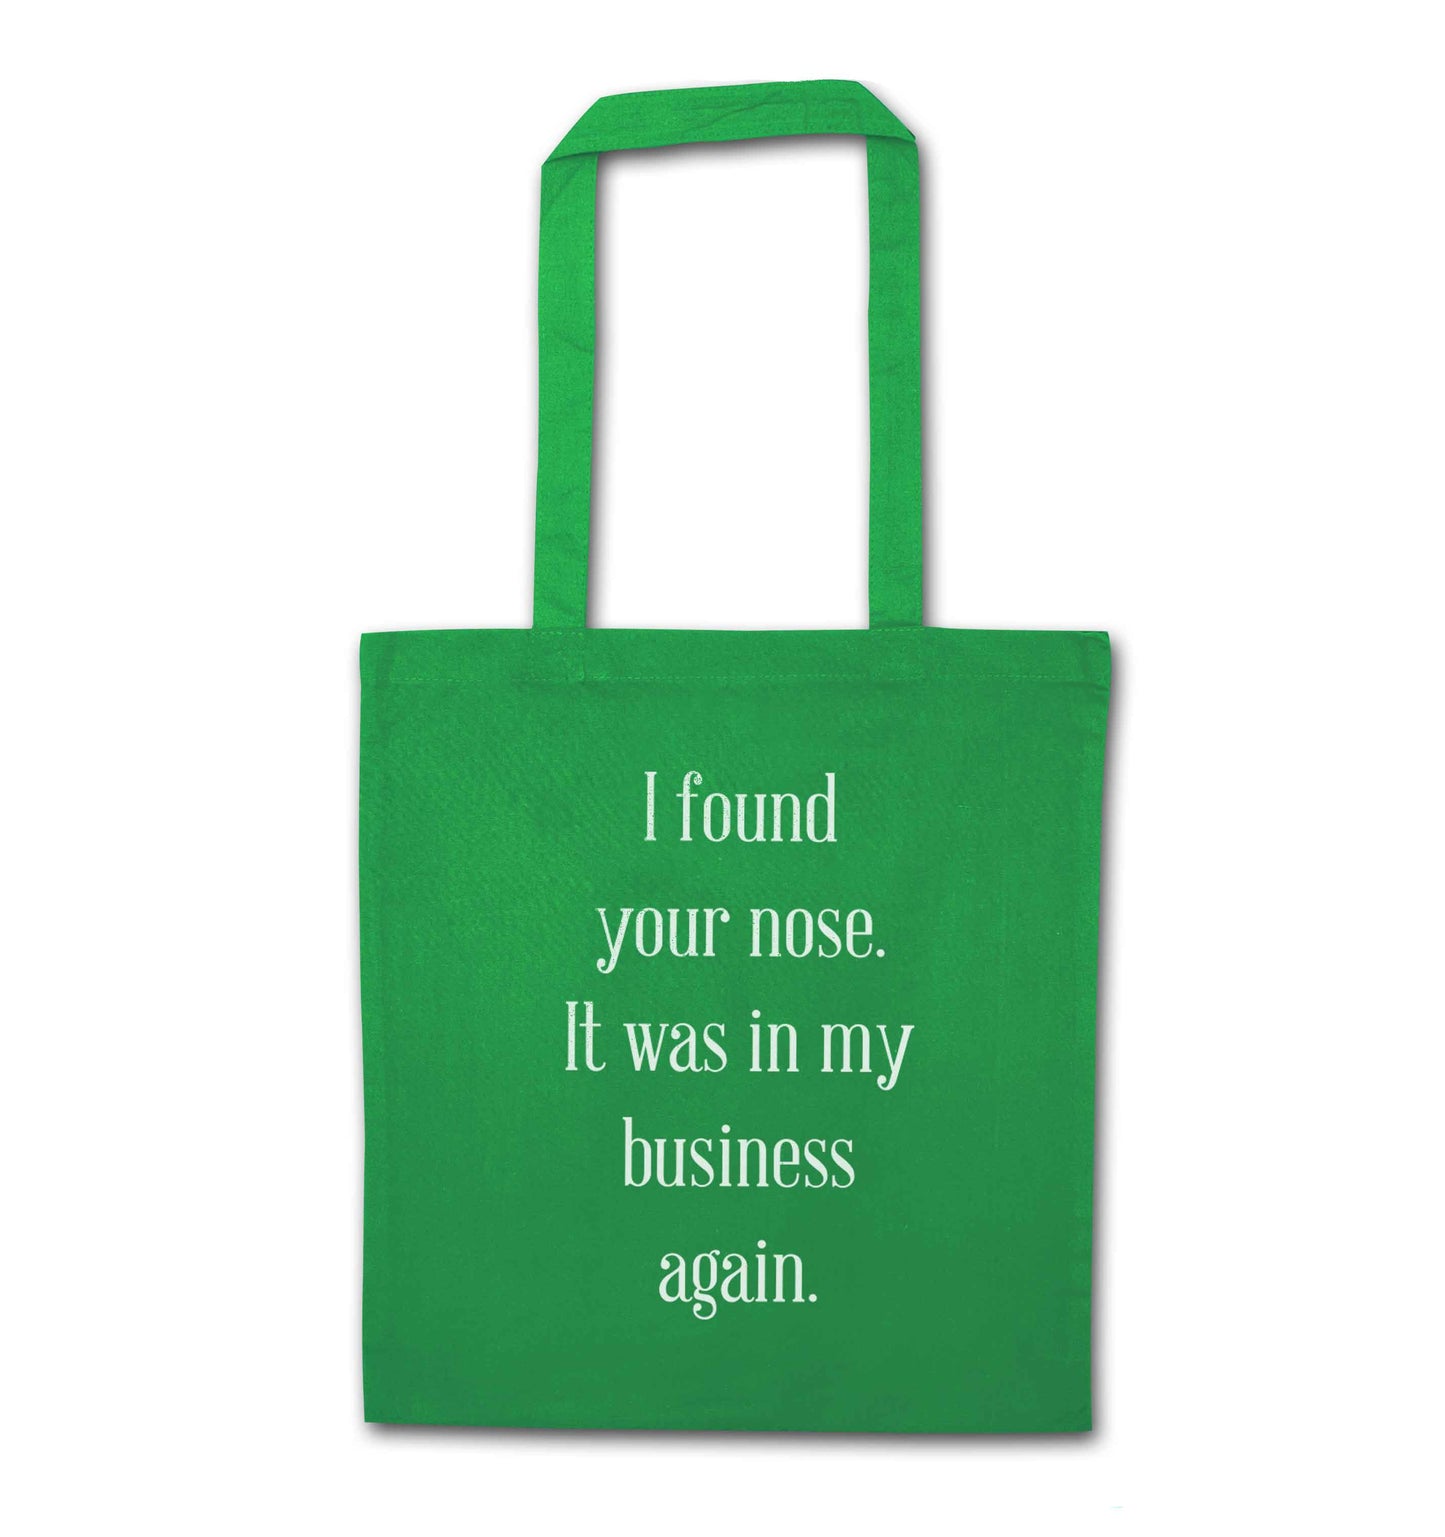 I found your nose it was in my business again green tote bag